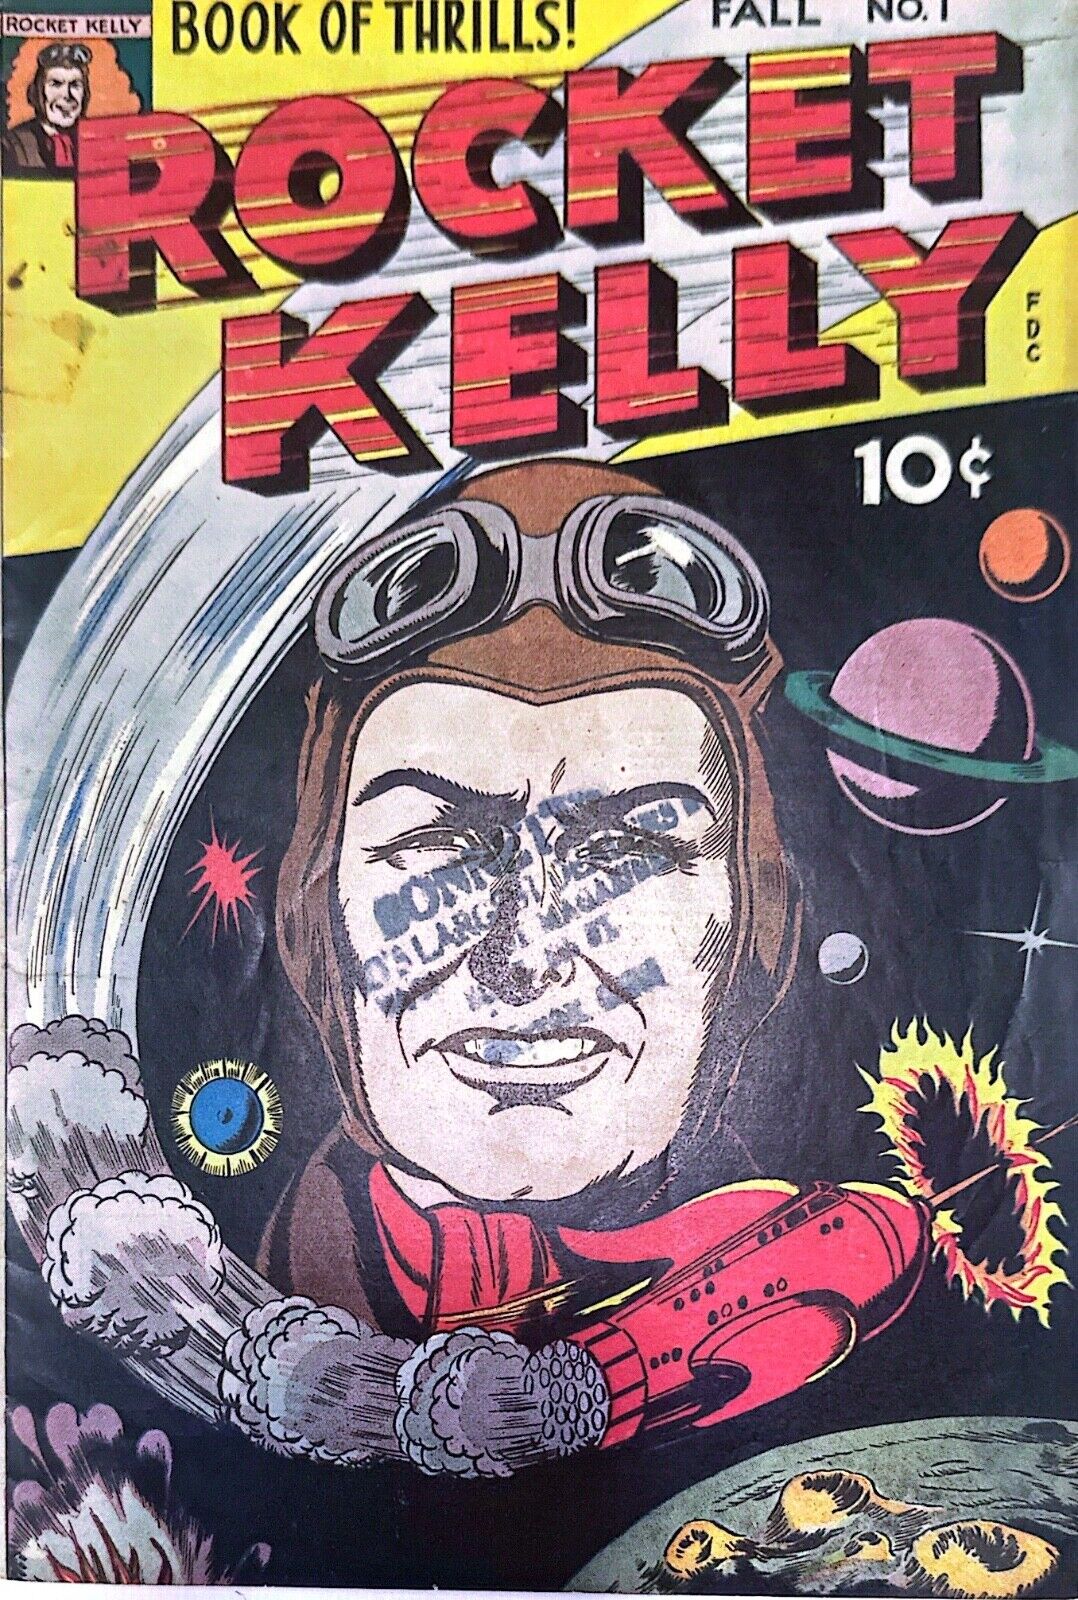 Rocket Kelly #1 by Fox Feature Syndicate (1945) - Very good (4.0)